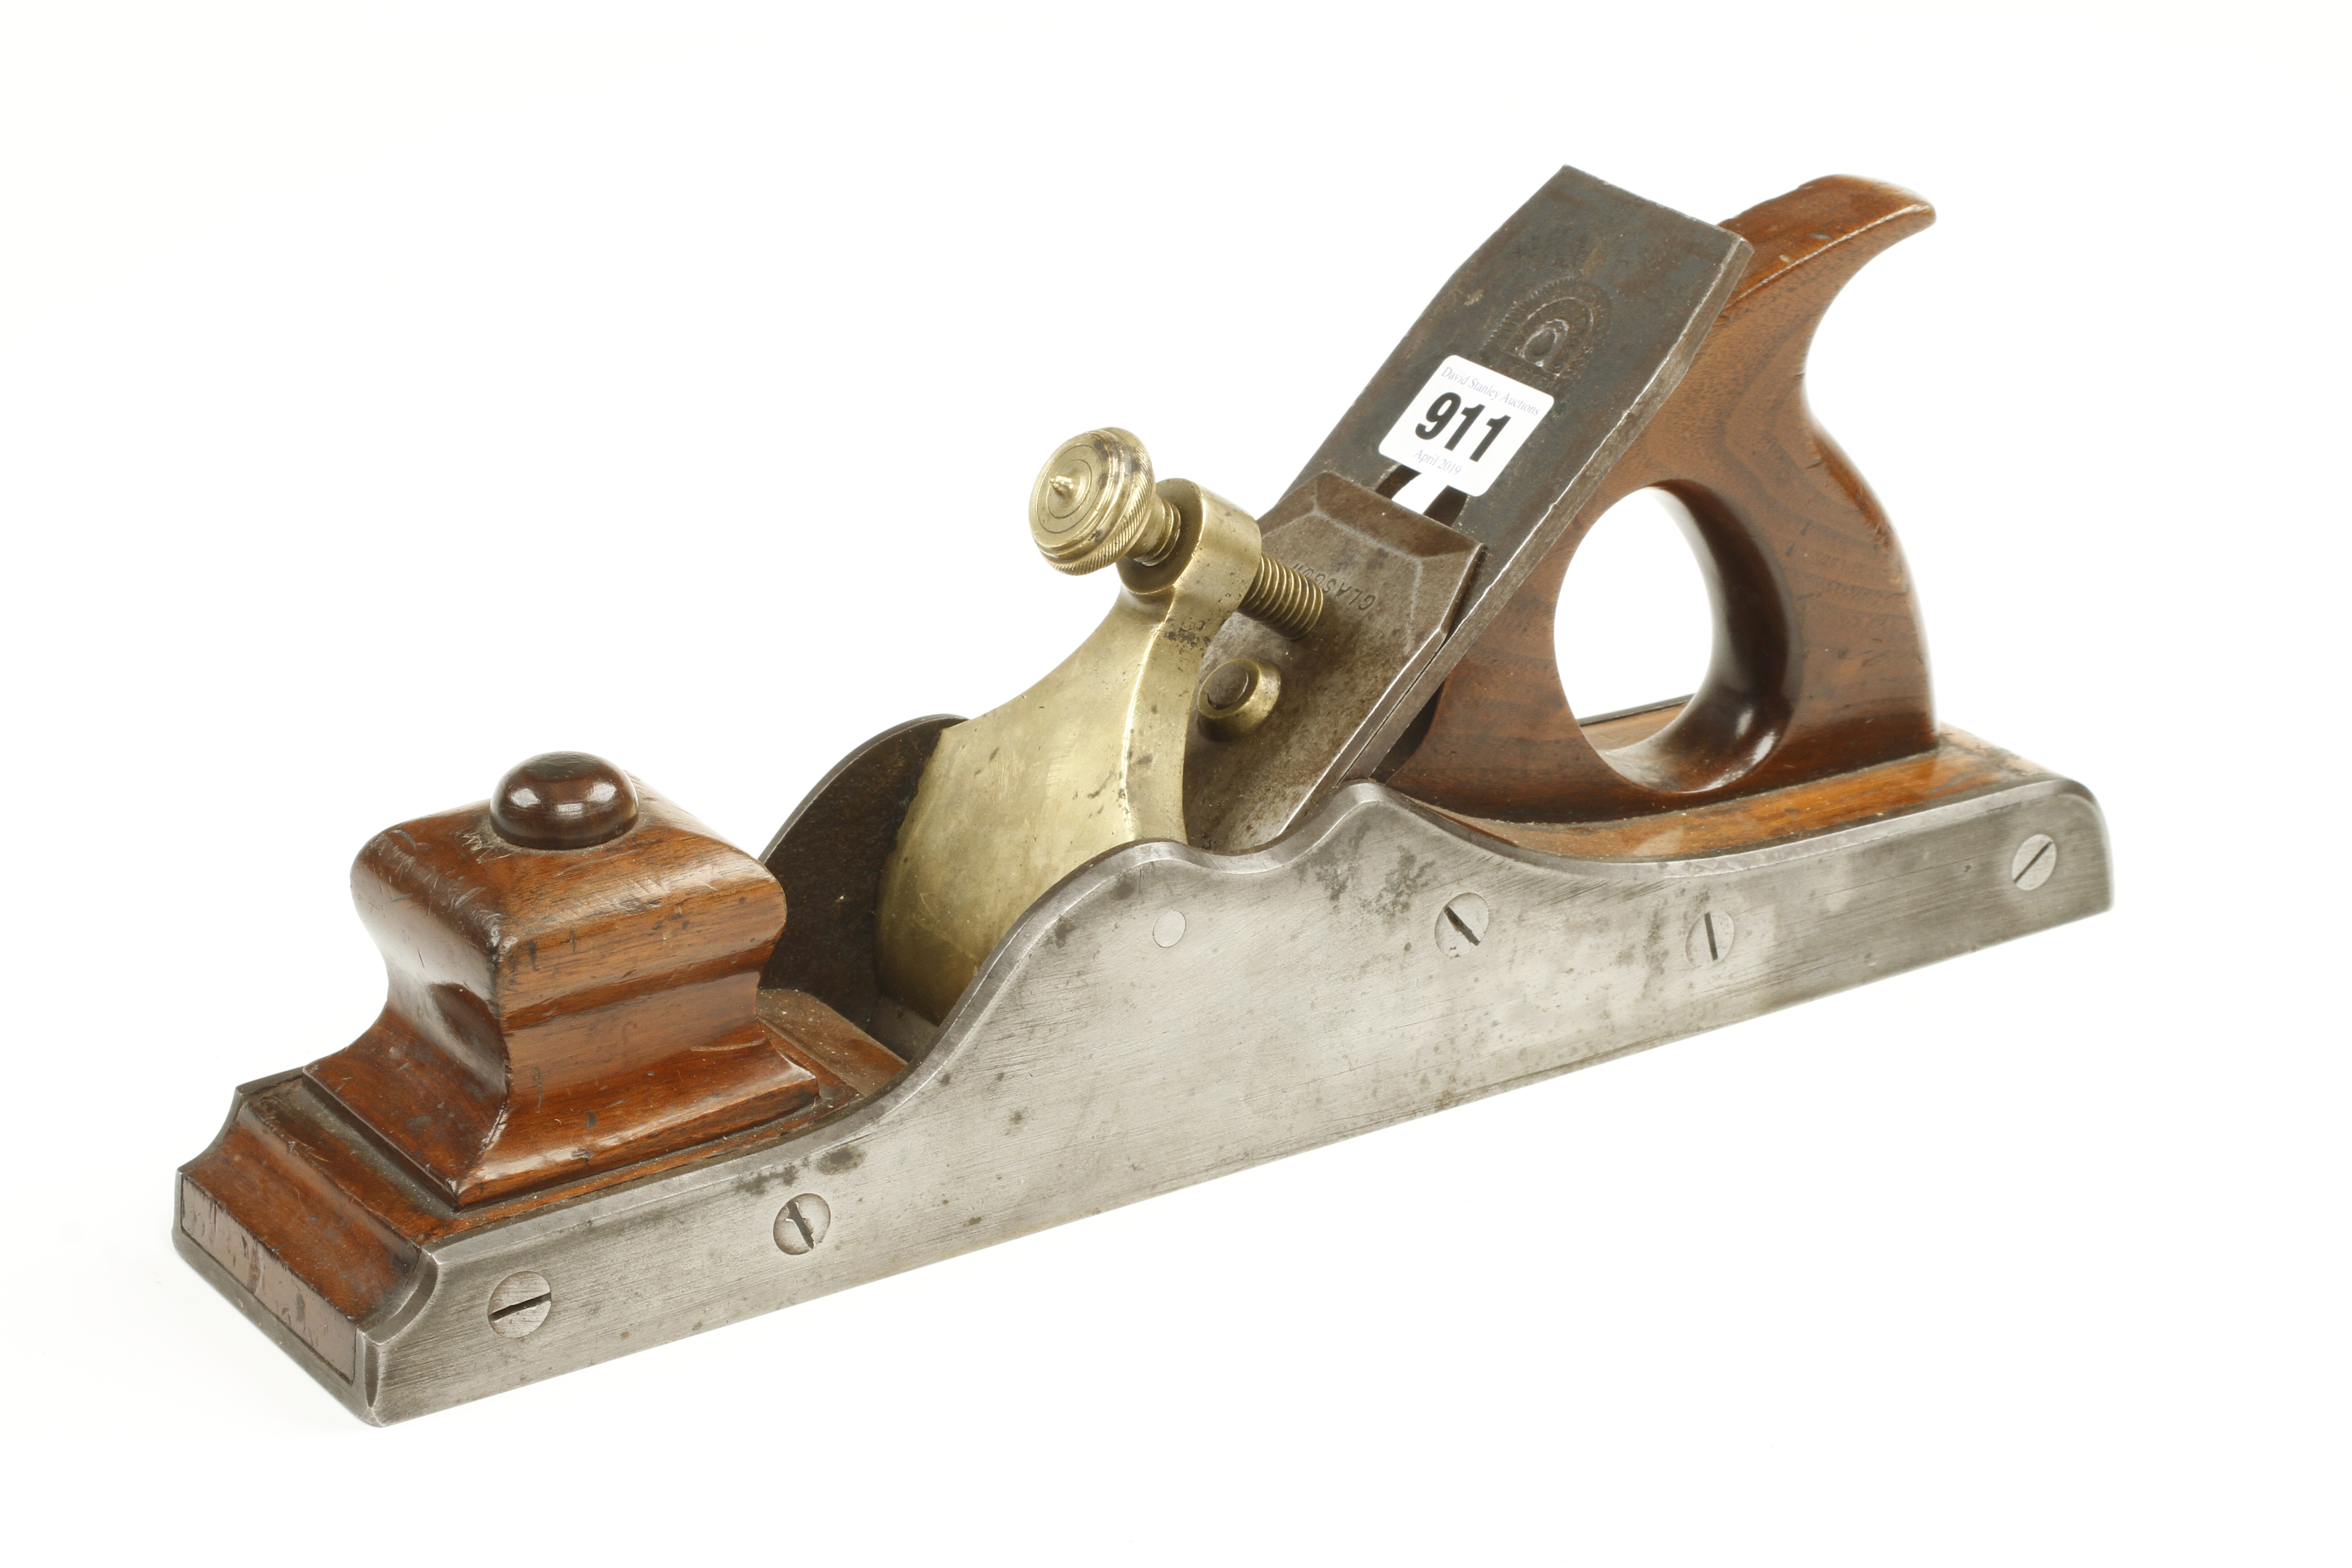 A fine quality 14 1/2" Scottish iron panel plane with mahogany infill and handle,